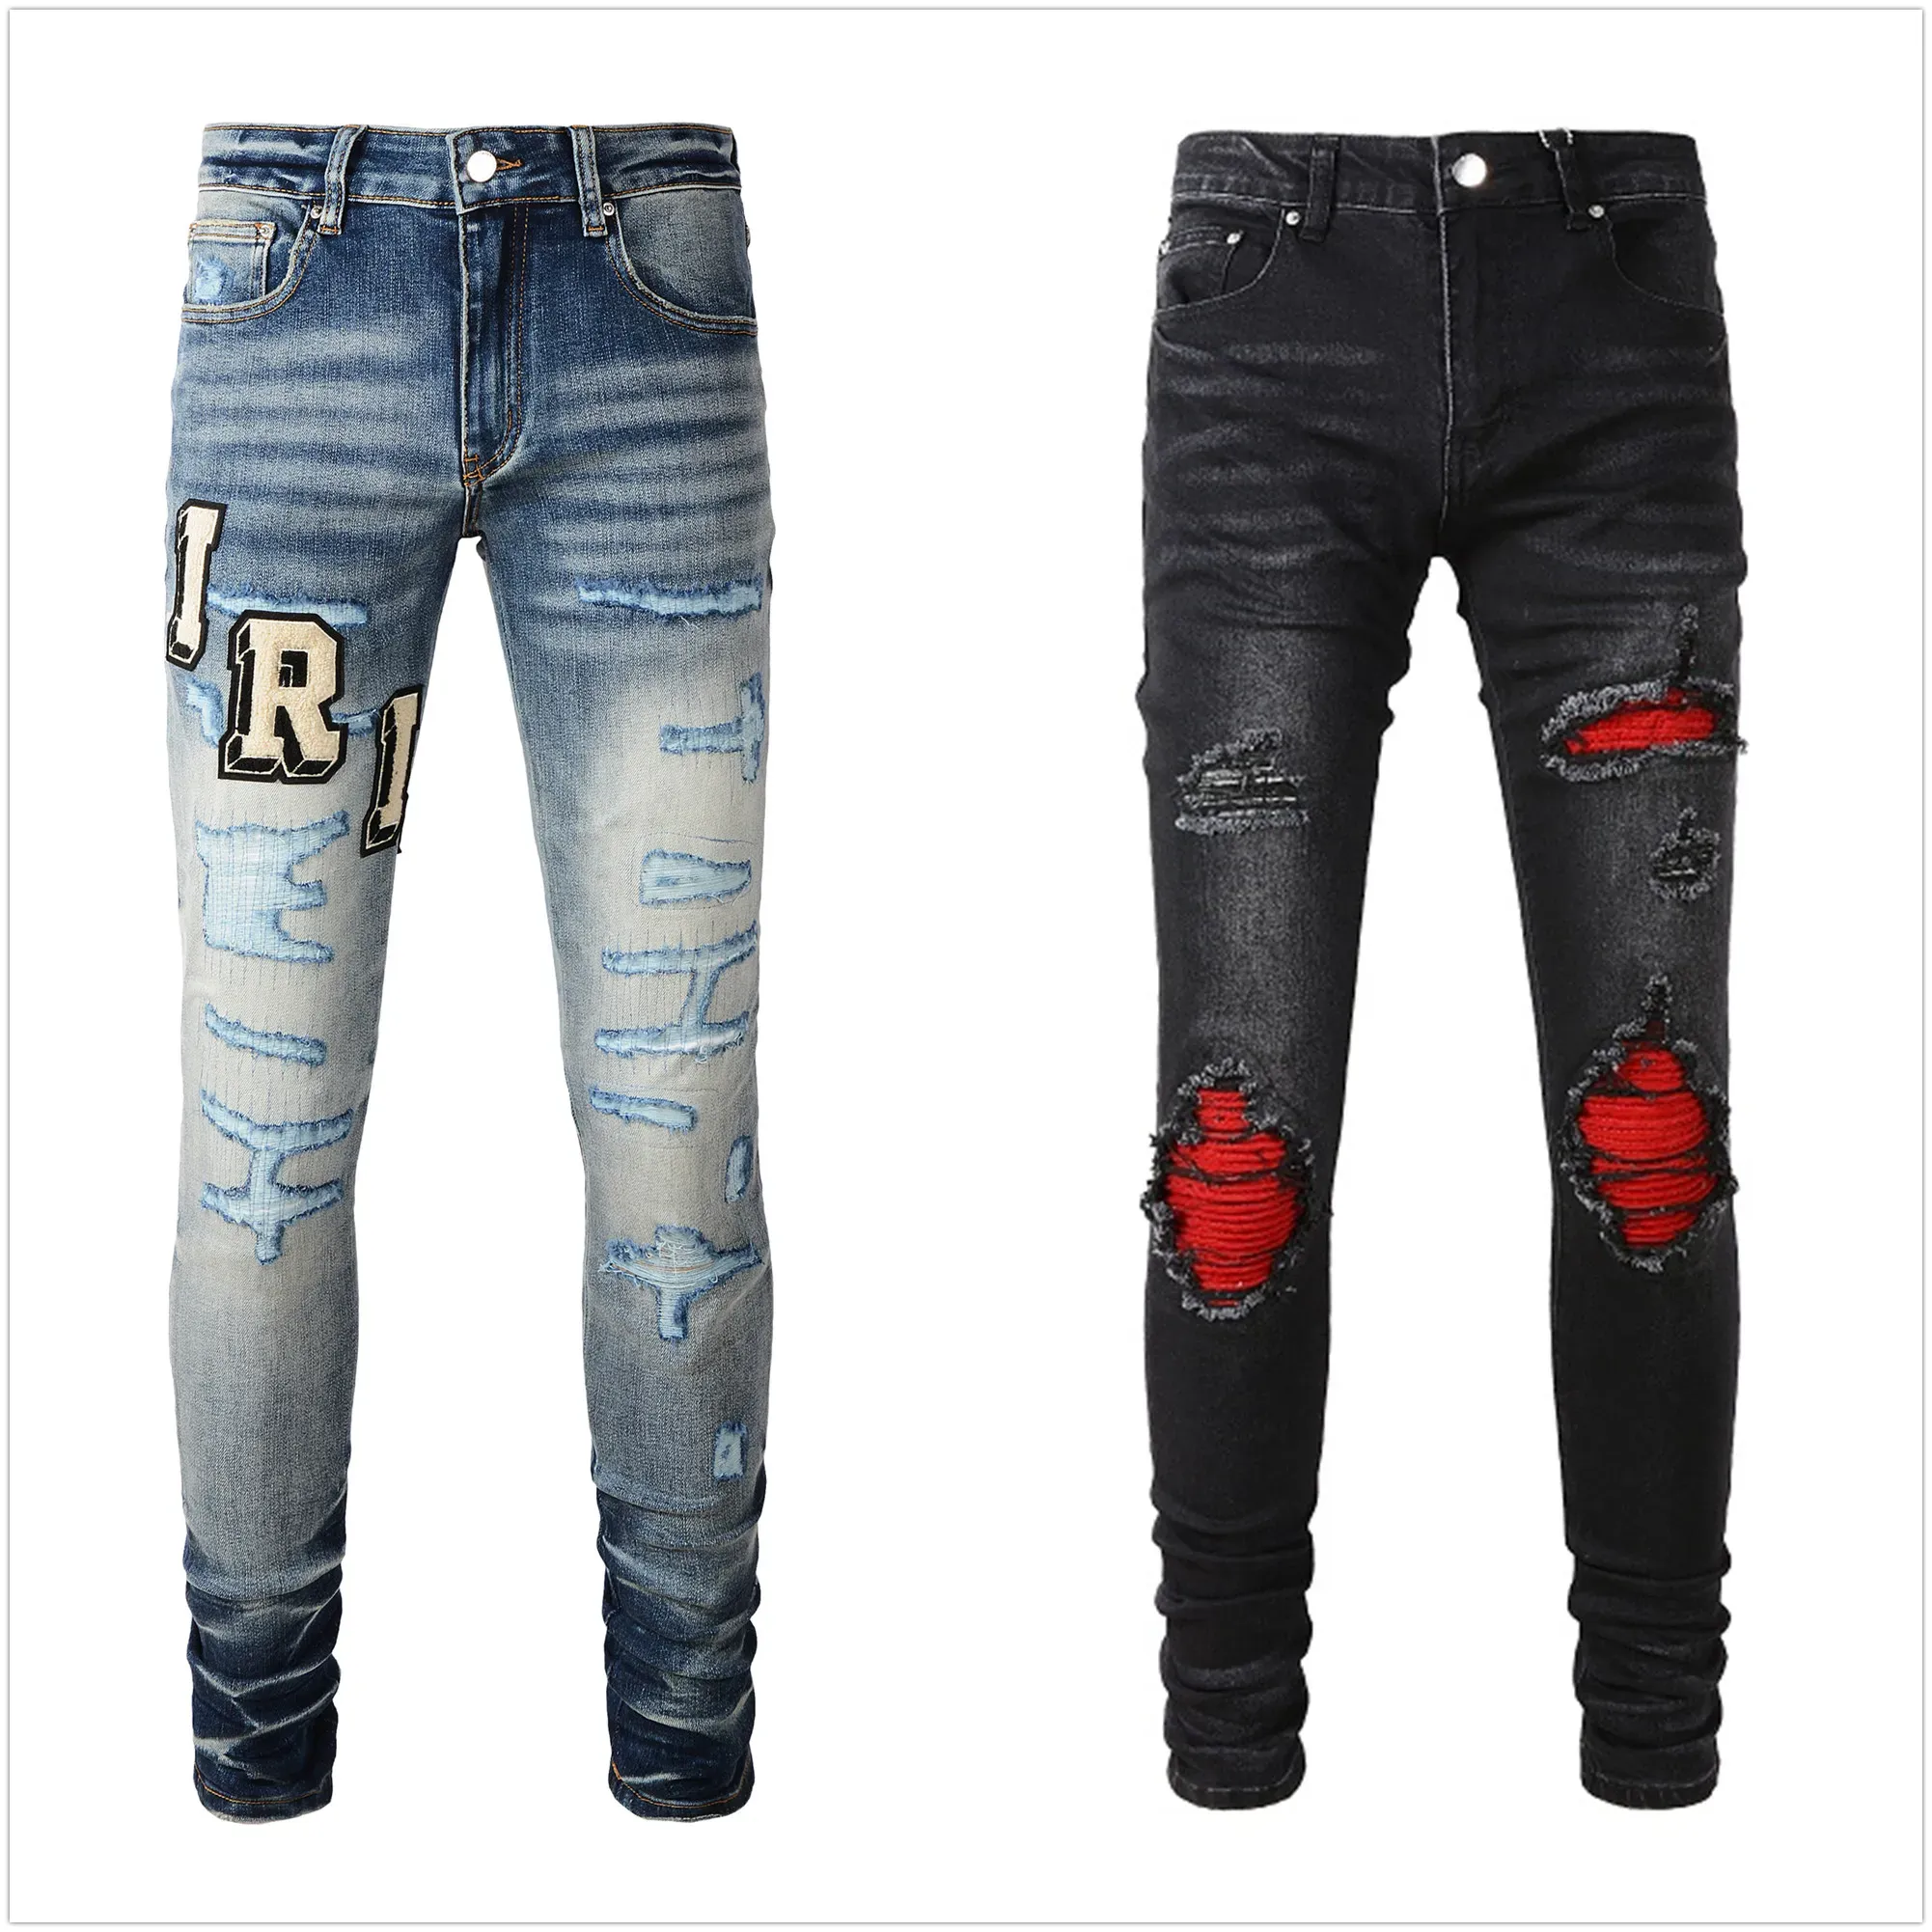 designer jeans luxury mens jeans Hiking Pant Ripped Hip hop High Street Fashion Brand Pantalones Vaqueros Para Hombre Motorcycle Embroidery Close fitting 90707880